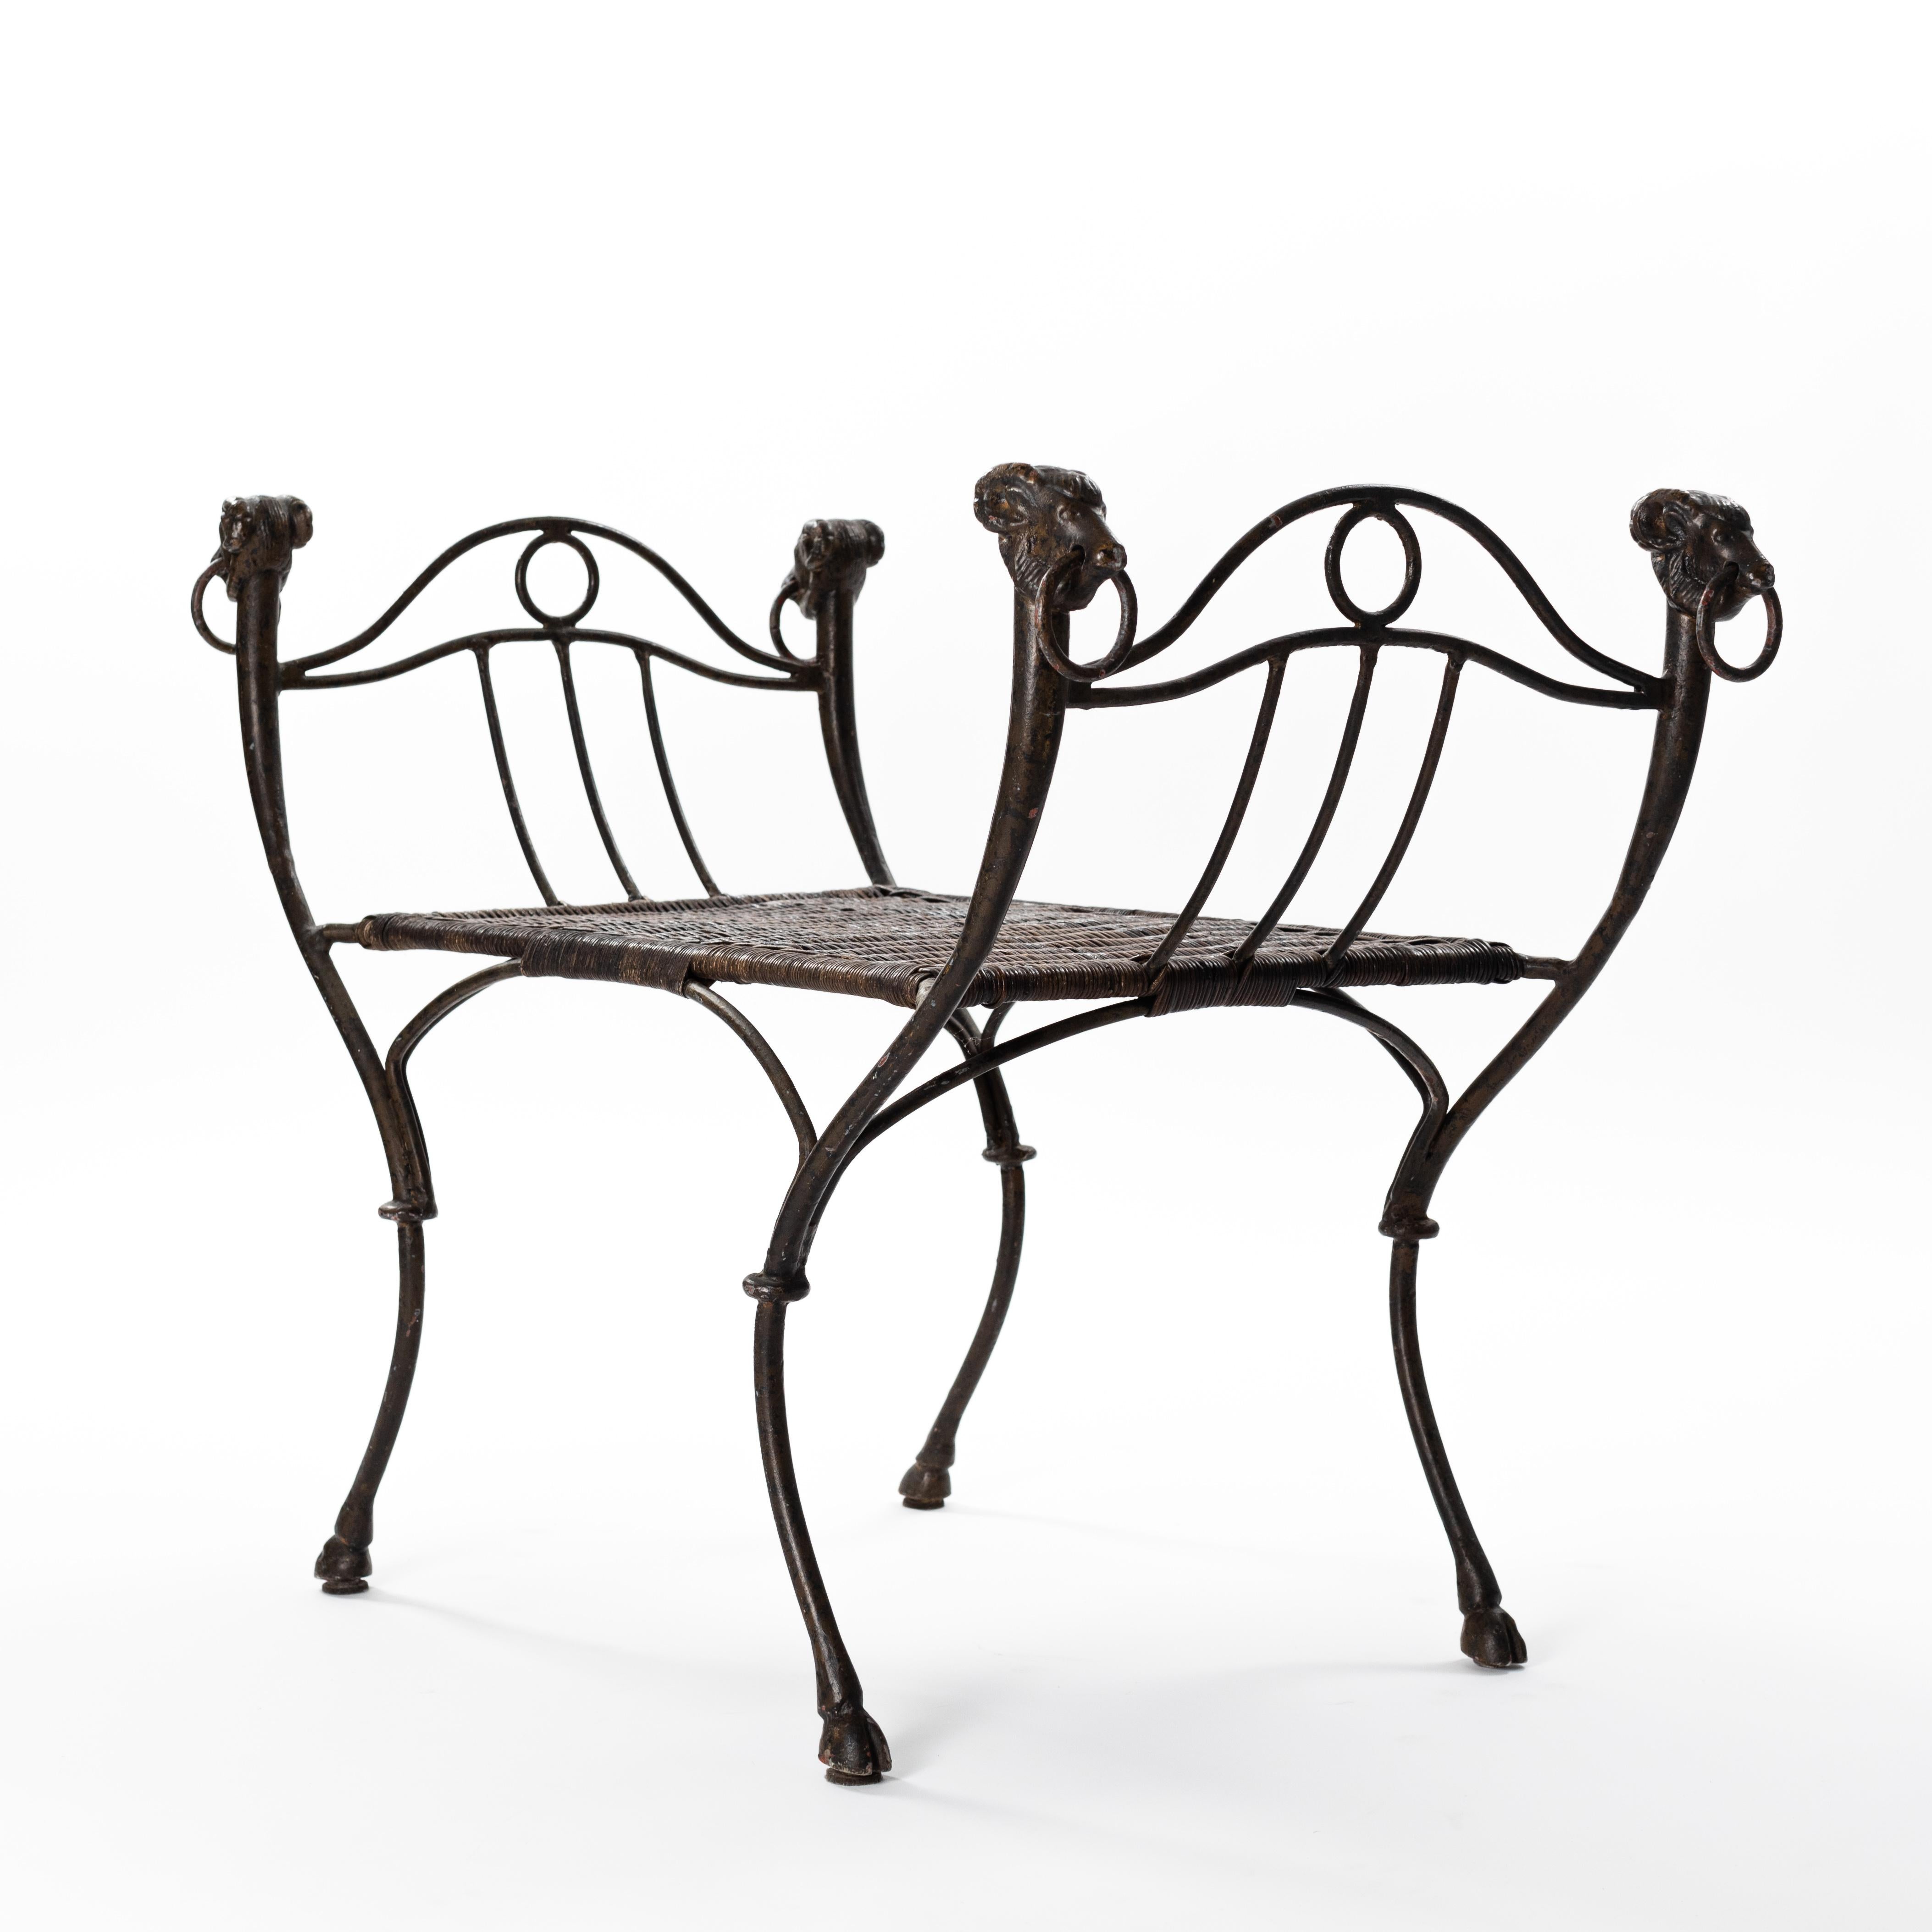 Art Deco French Wrought Iron Bench with Ratan Seat Wickerwork from the 1940s